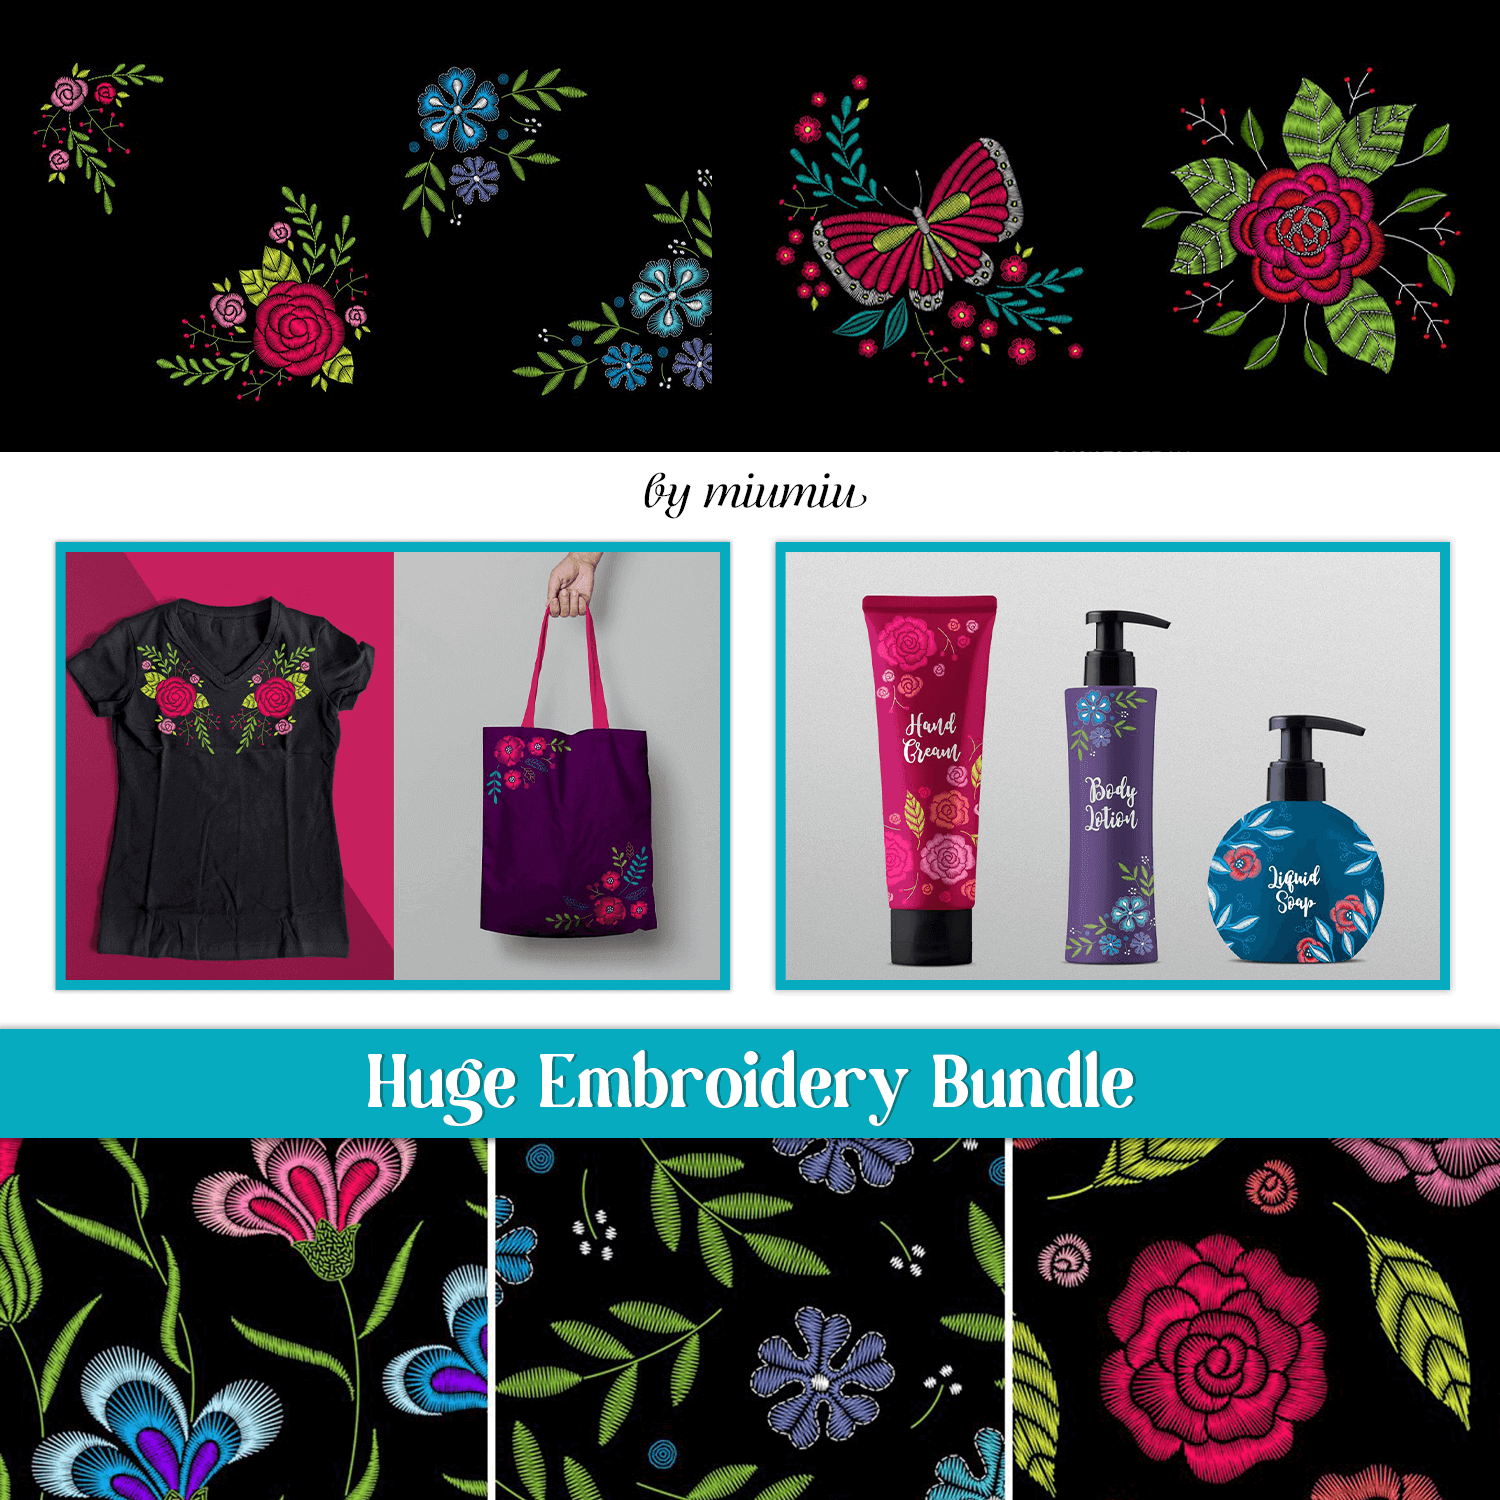 Floral mixes on various items of clothing, household items and cosmetics.